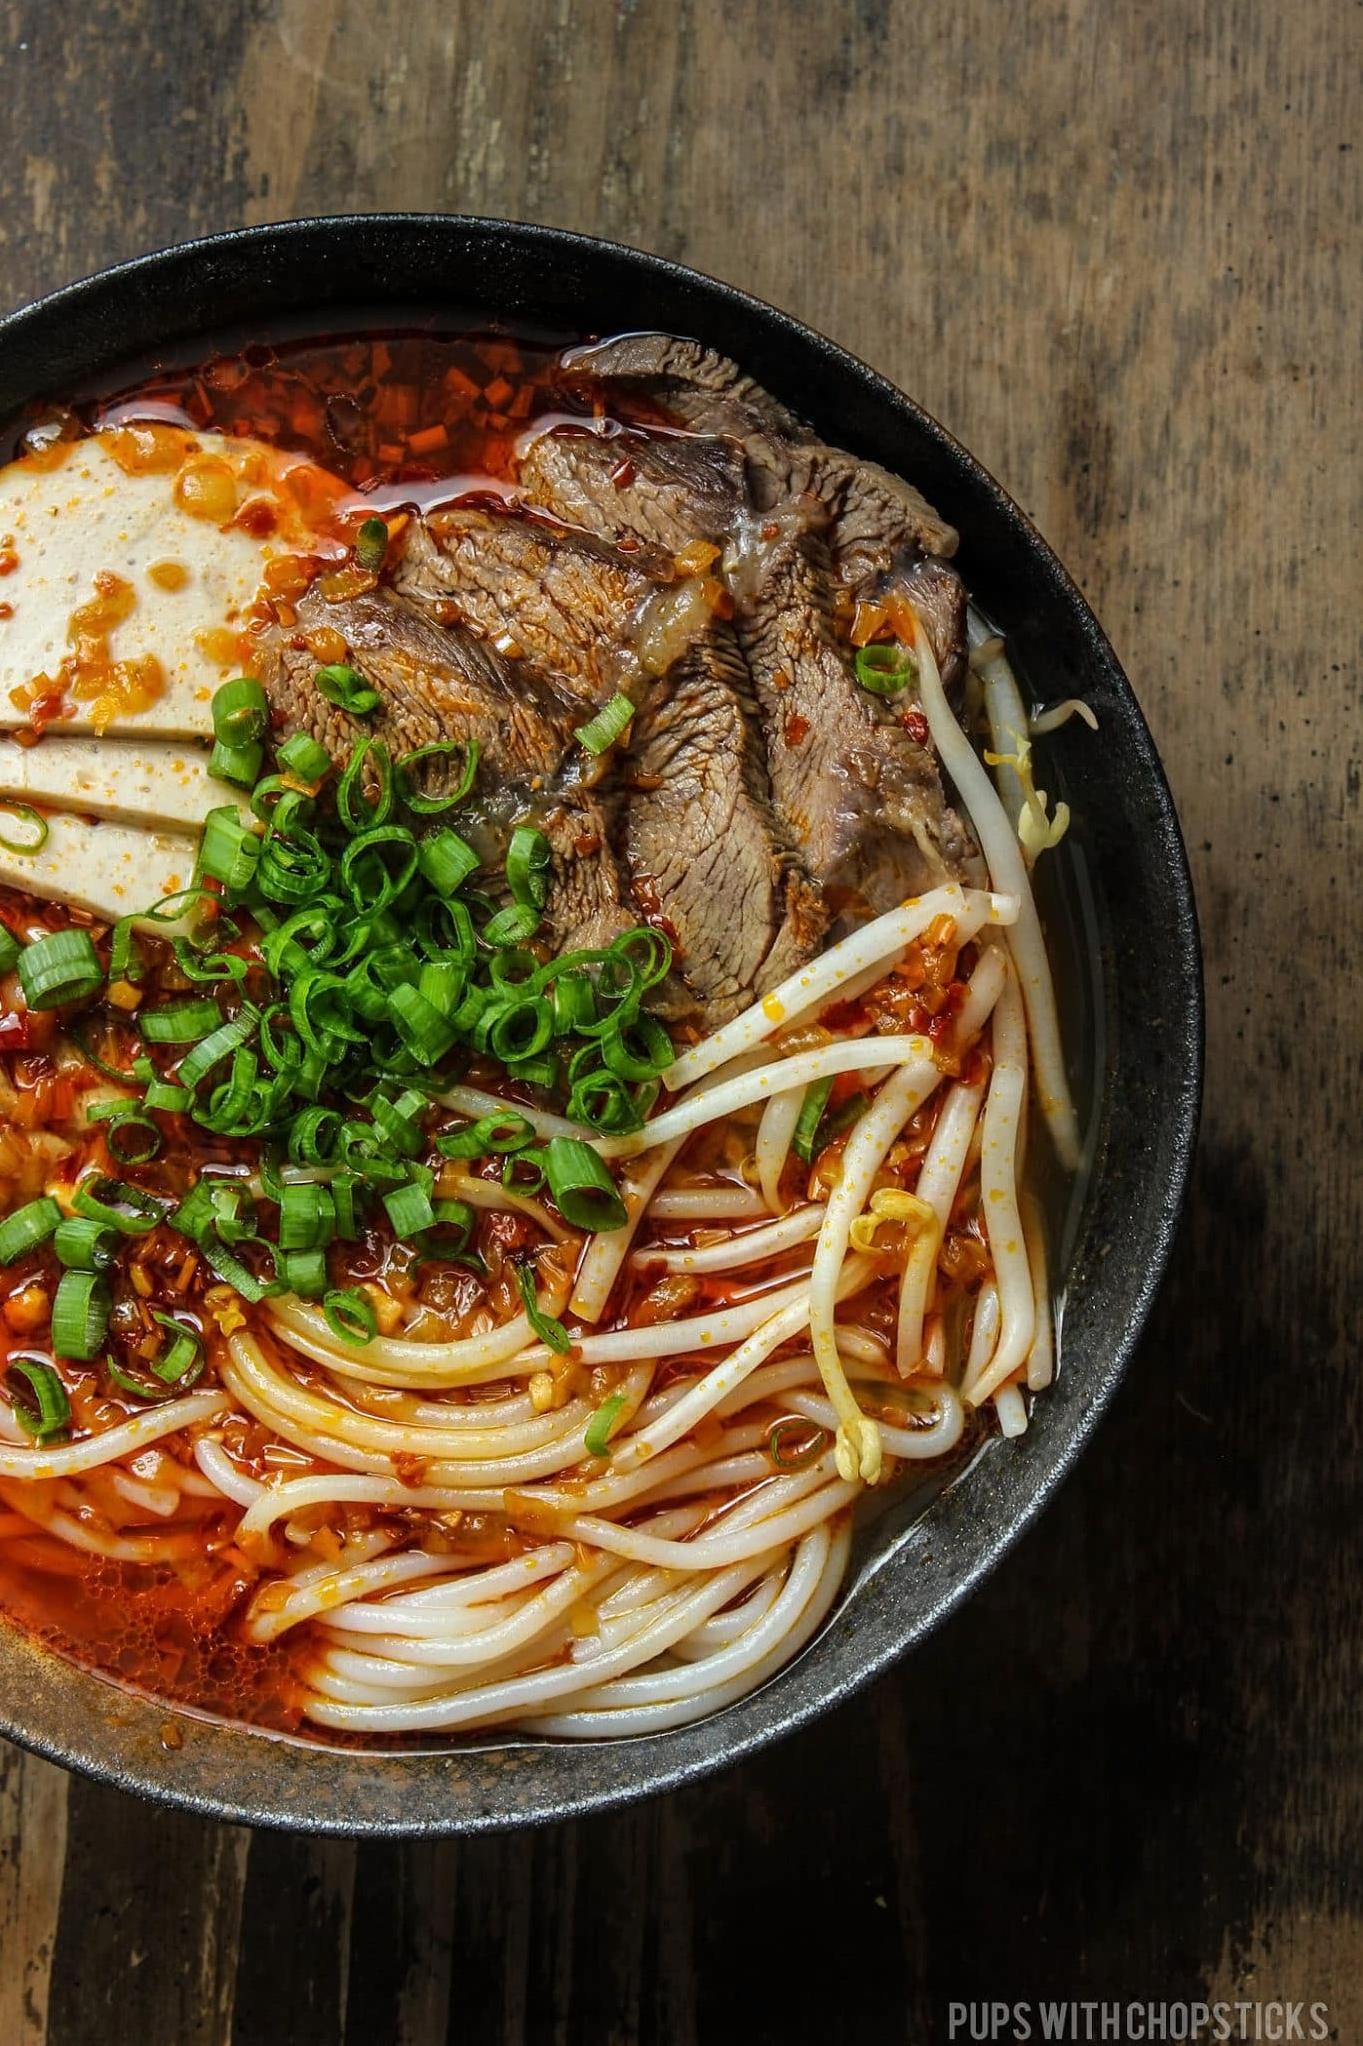  A bowl of Bun Bo Hue warms the soul, even on the coldest of days.